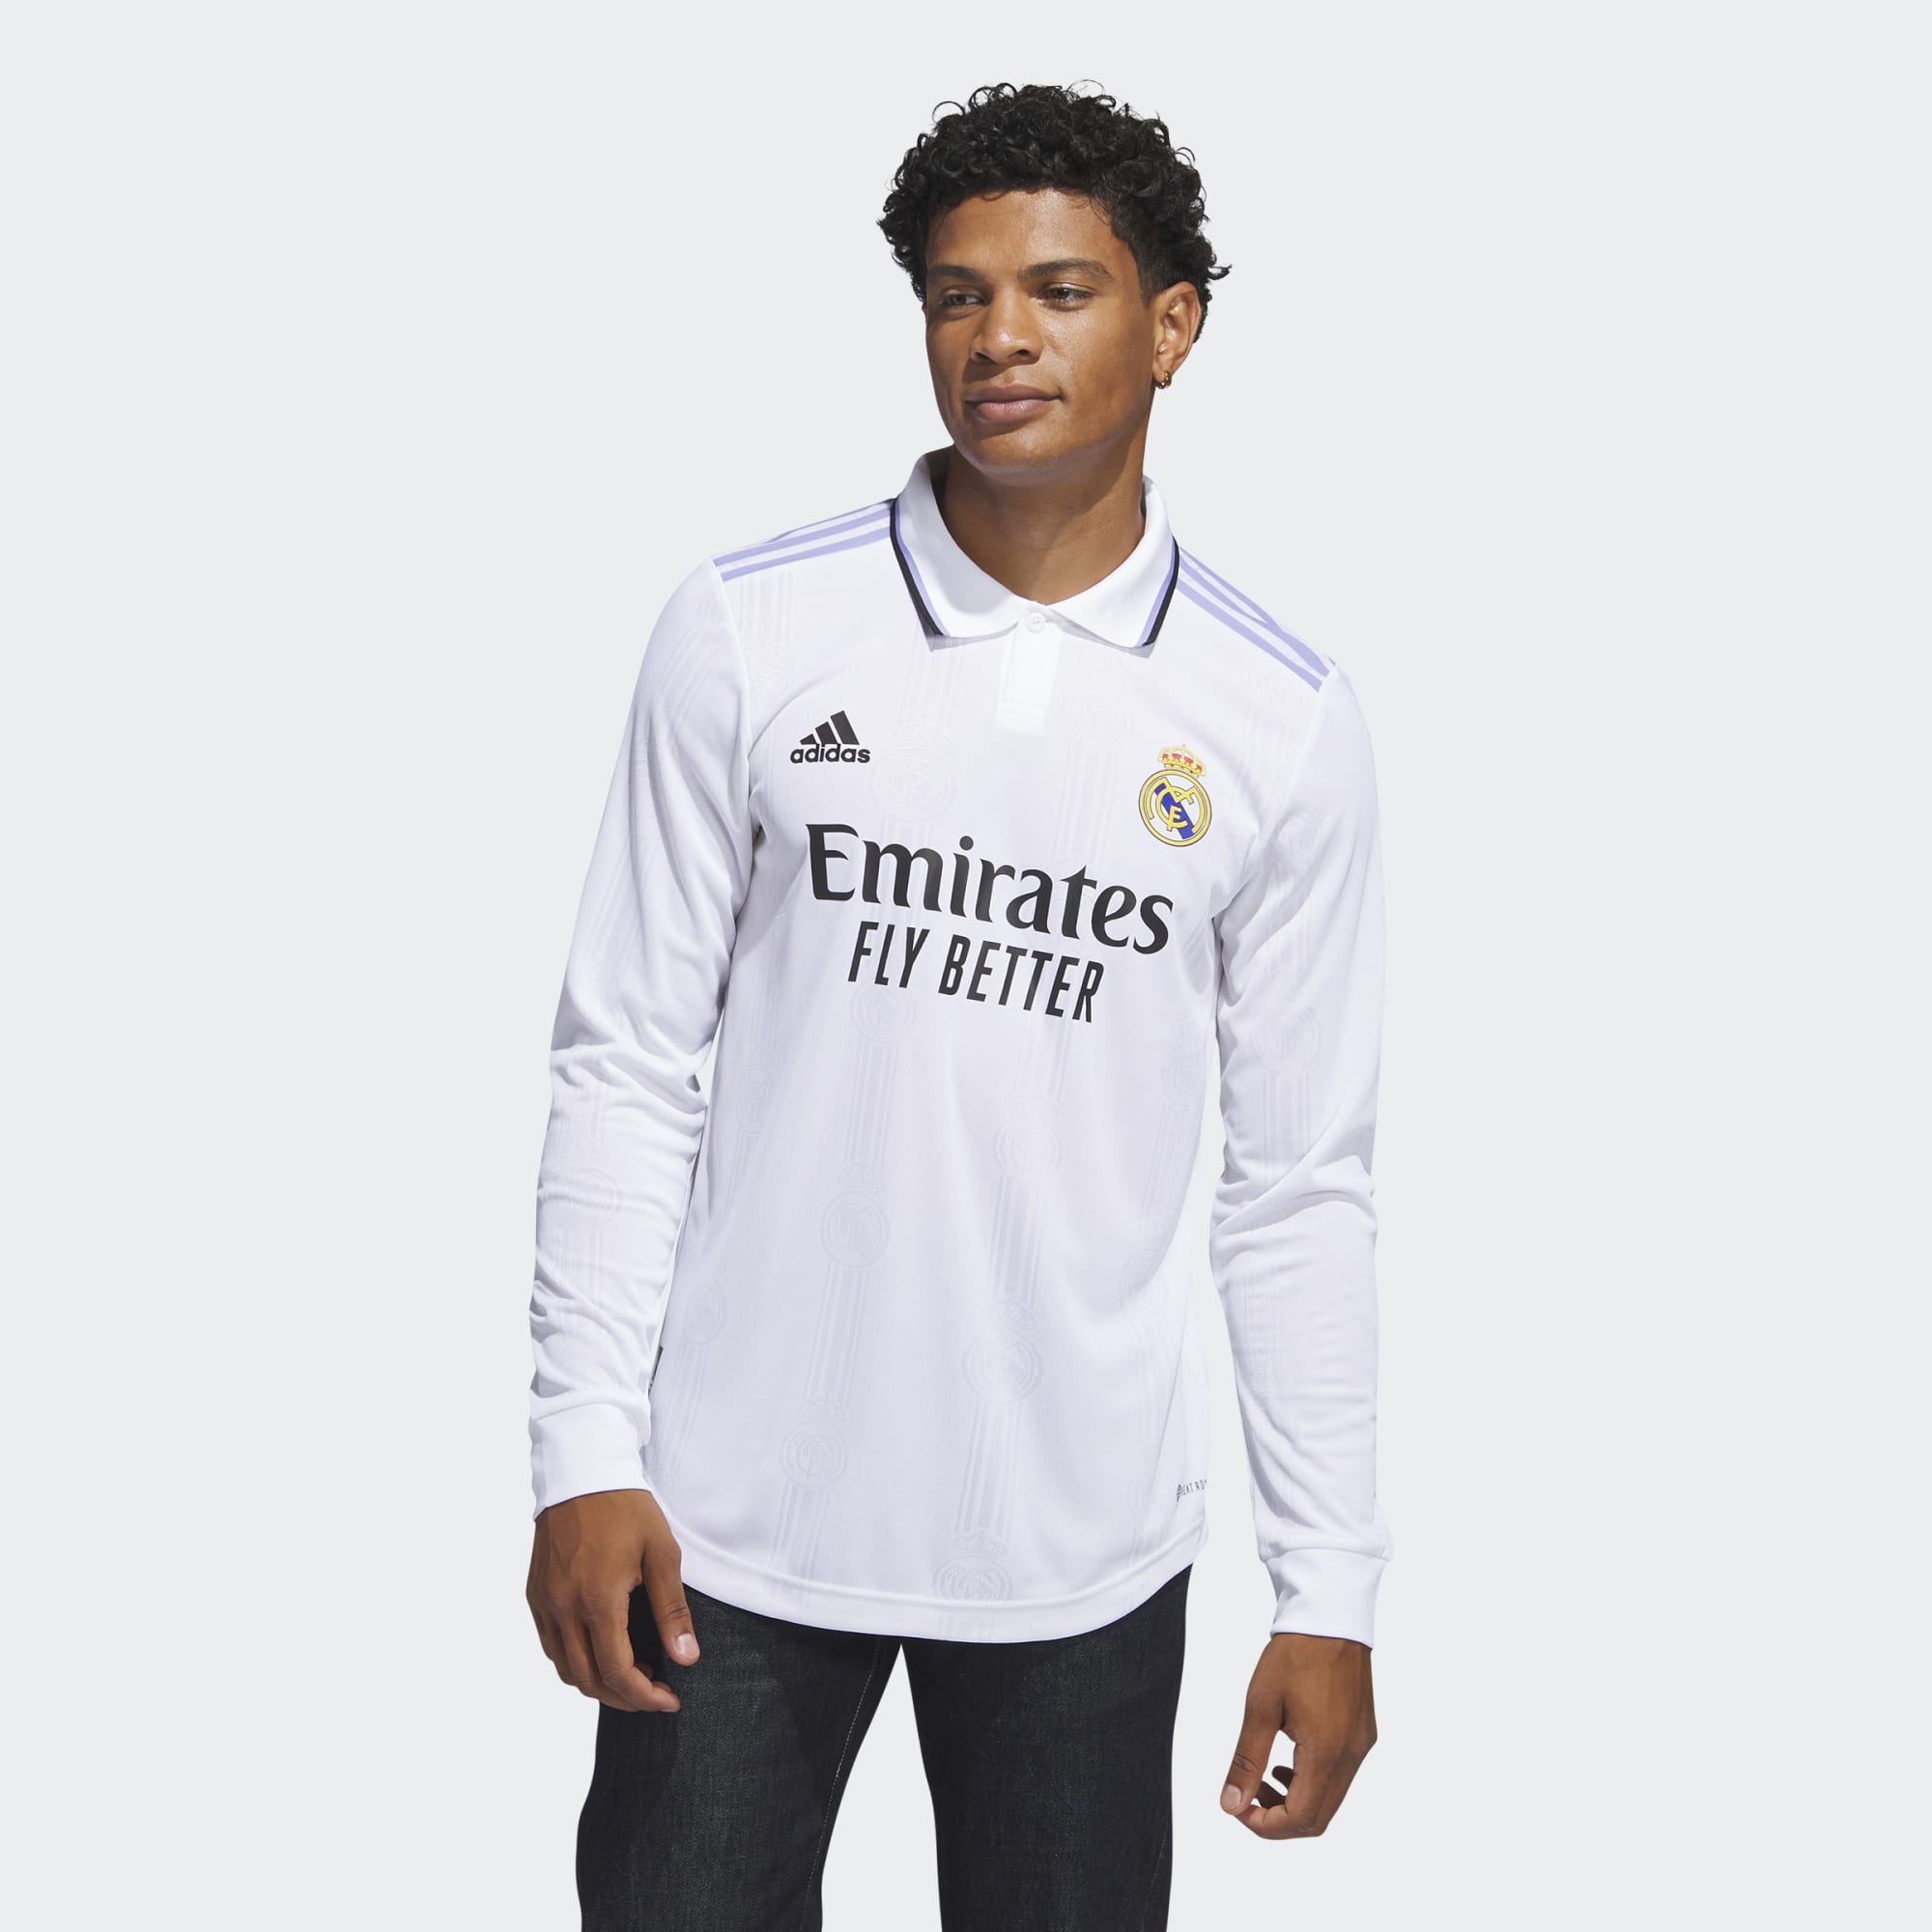 Adidas Men's Real Madrid Home Jersey - White, M